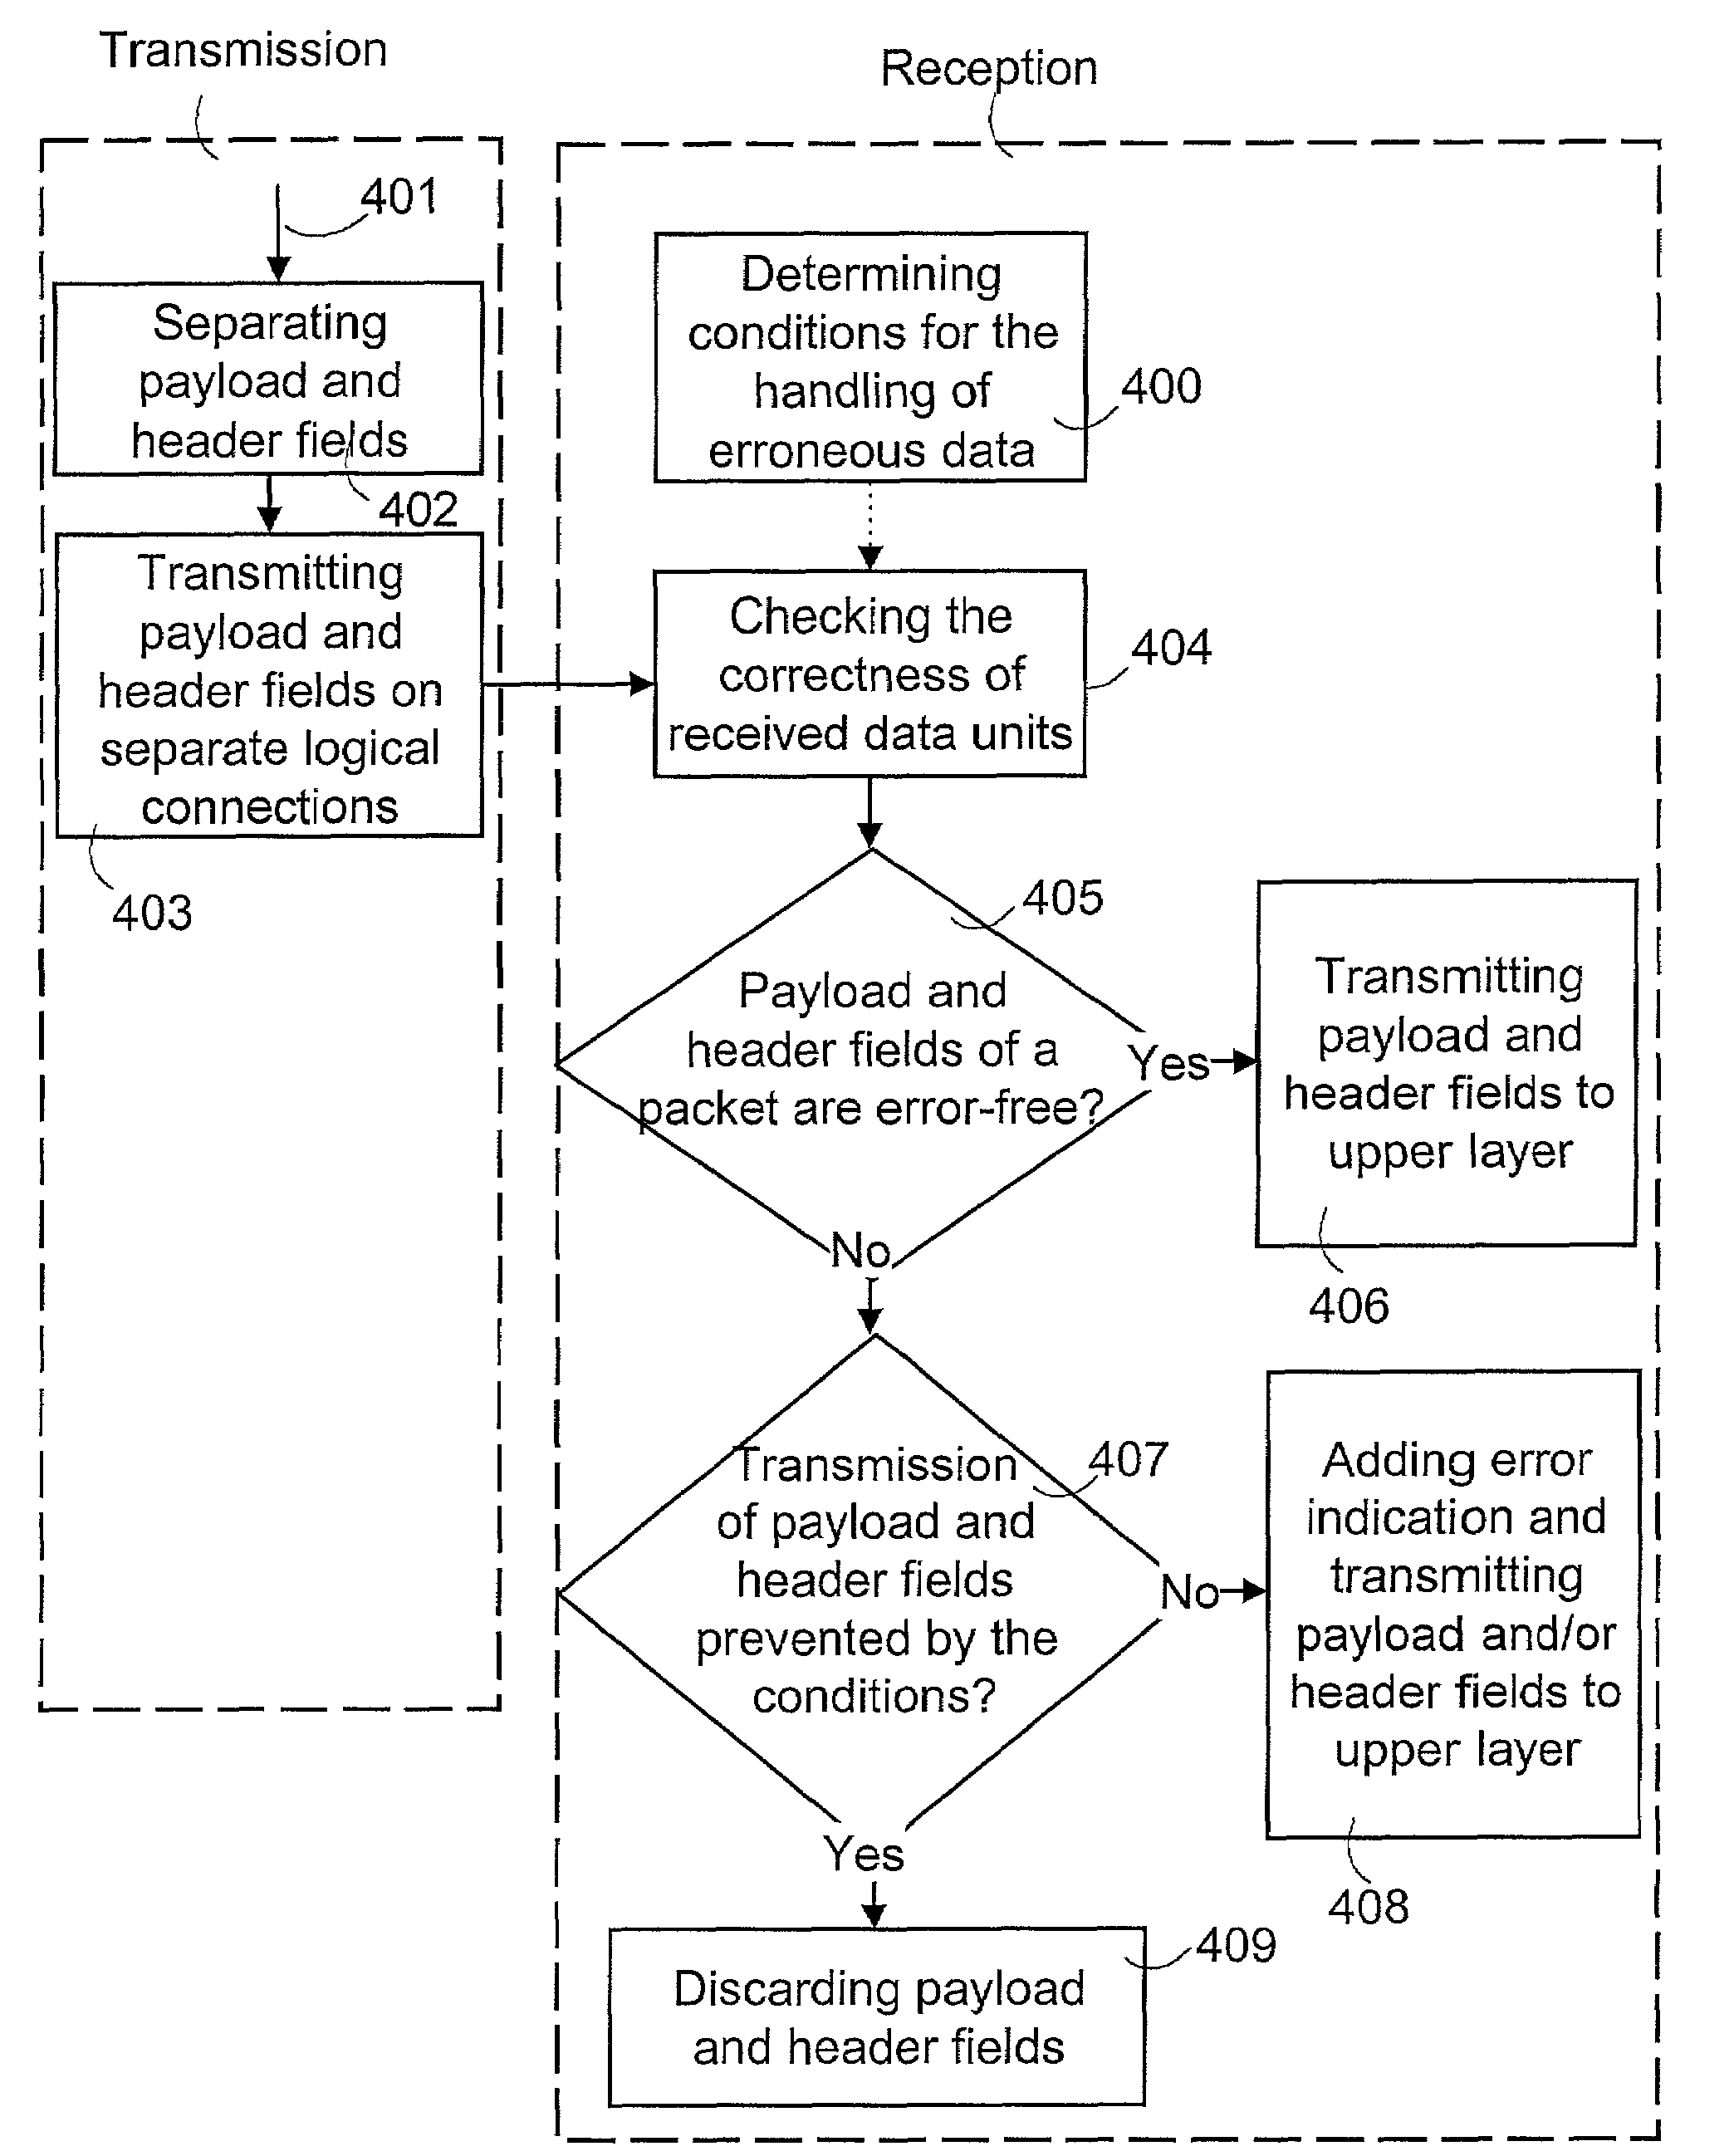 Processing of erroneous data in telecommunications system providing packet-switched data transfer